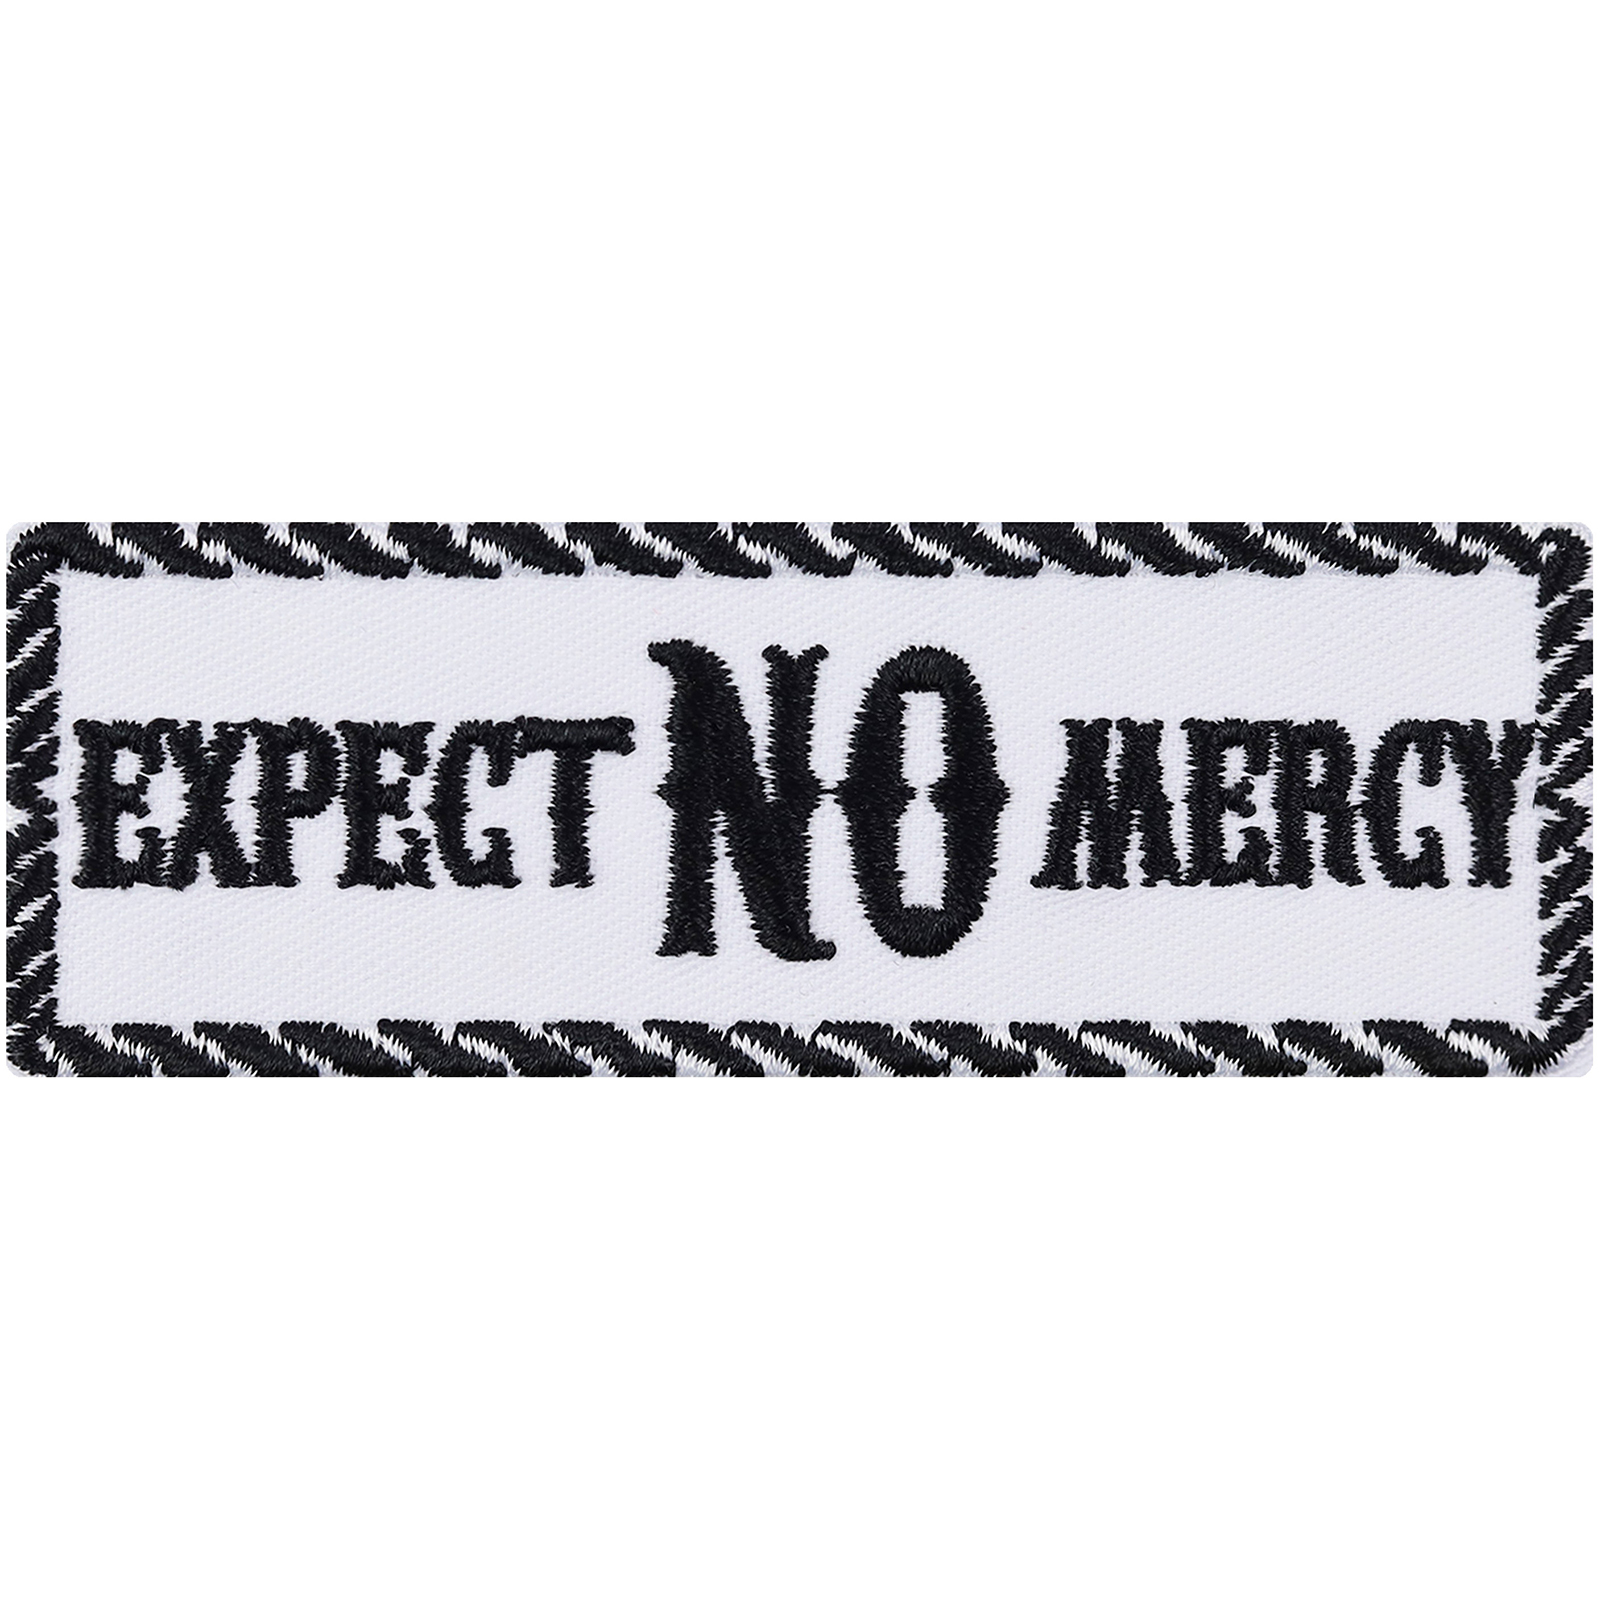 Expect no mercy - Patch